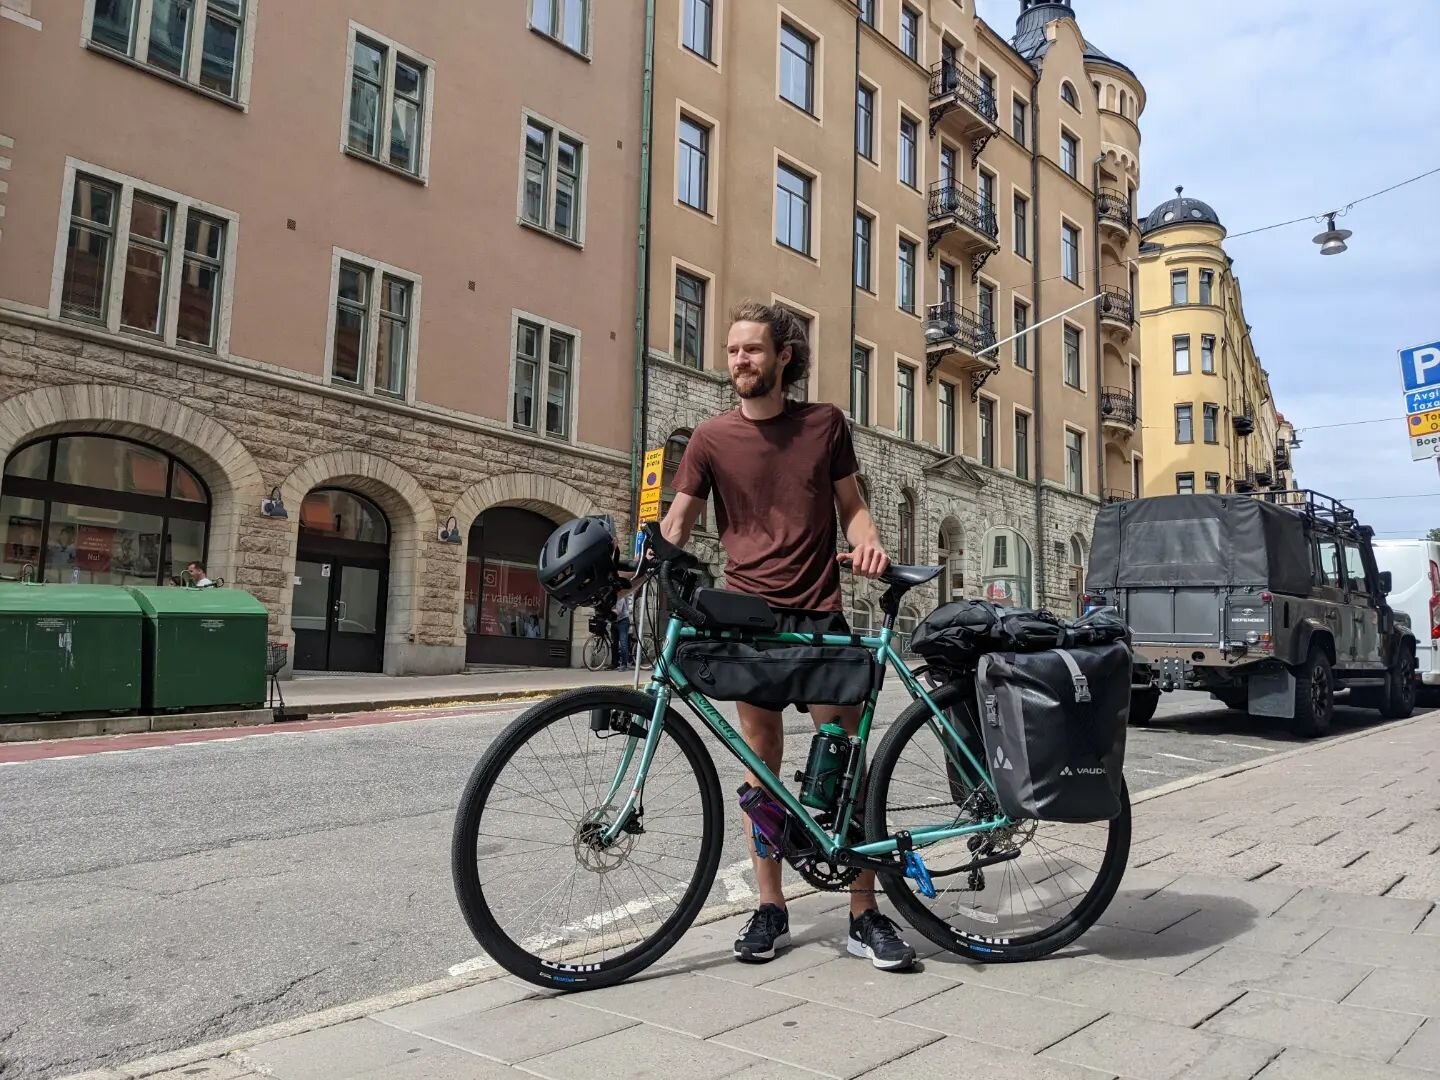 Got a bike and rode it 1200 km all the way across the Scandinavian Peninsula, Stockholm to Bergen. My butm hurt and it was worth it.